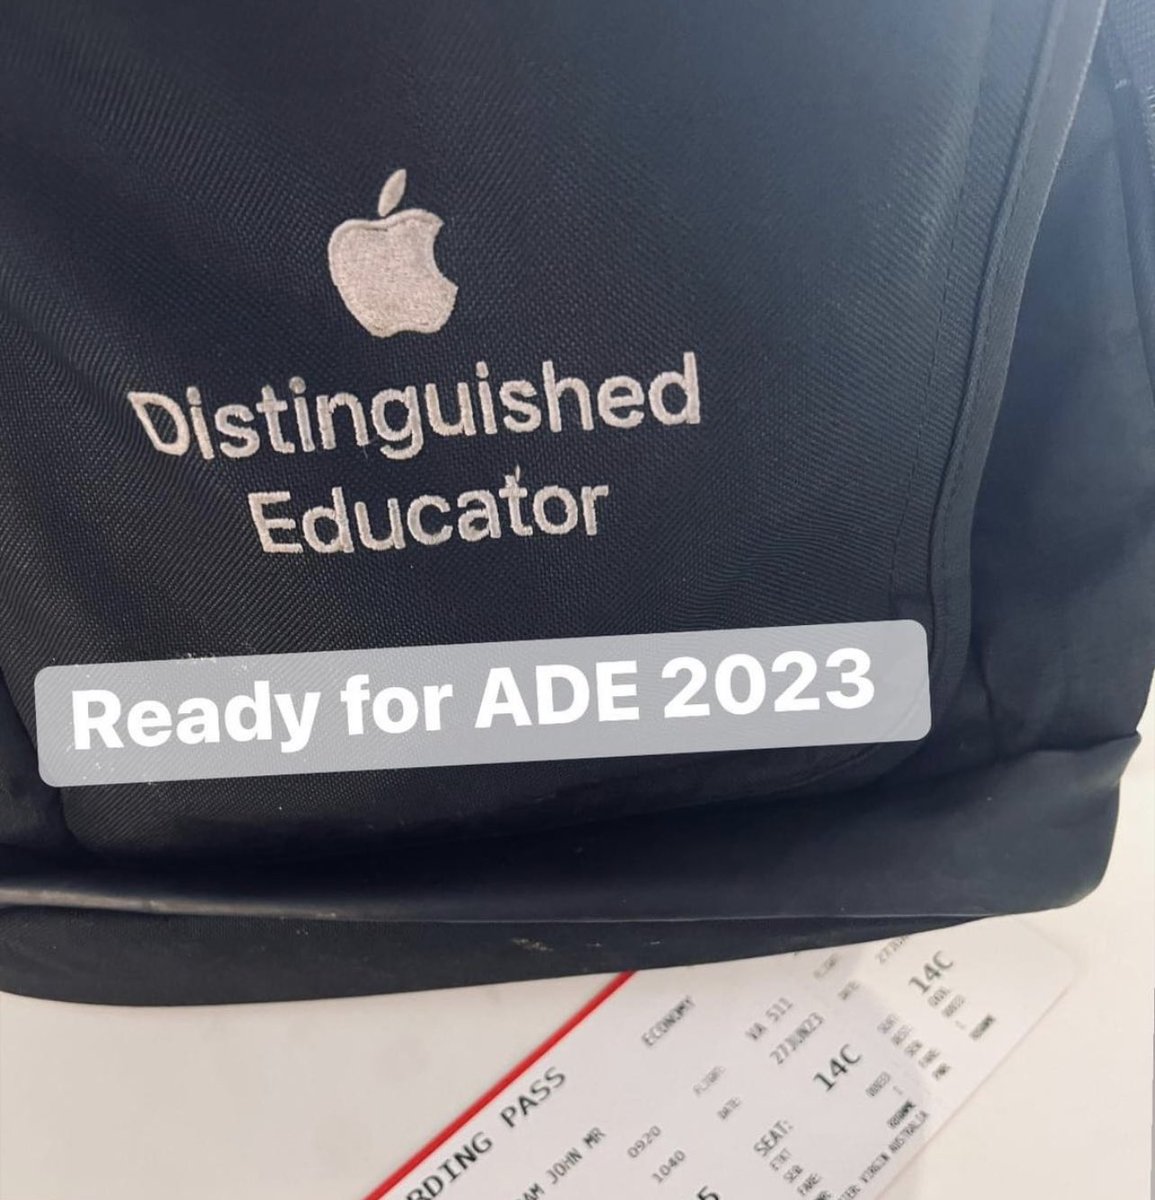 Ready for #ADE2023 #appleEDUchat 🍏 Looking forward to catching up with many of my Asia-Pacific friends! 💻